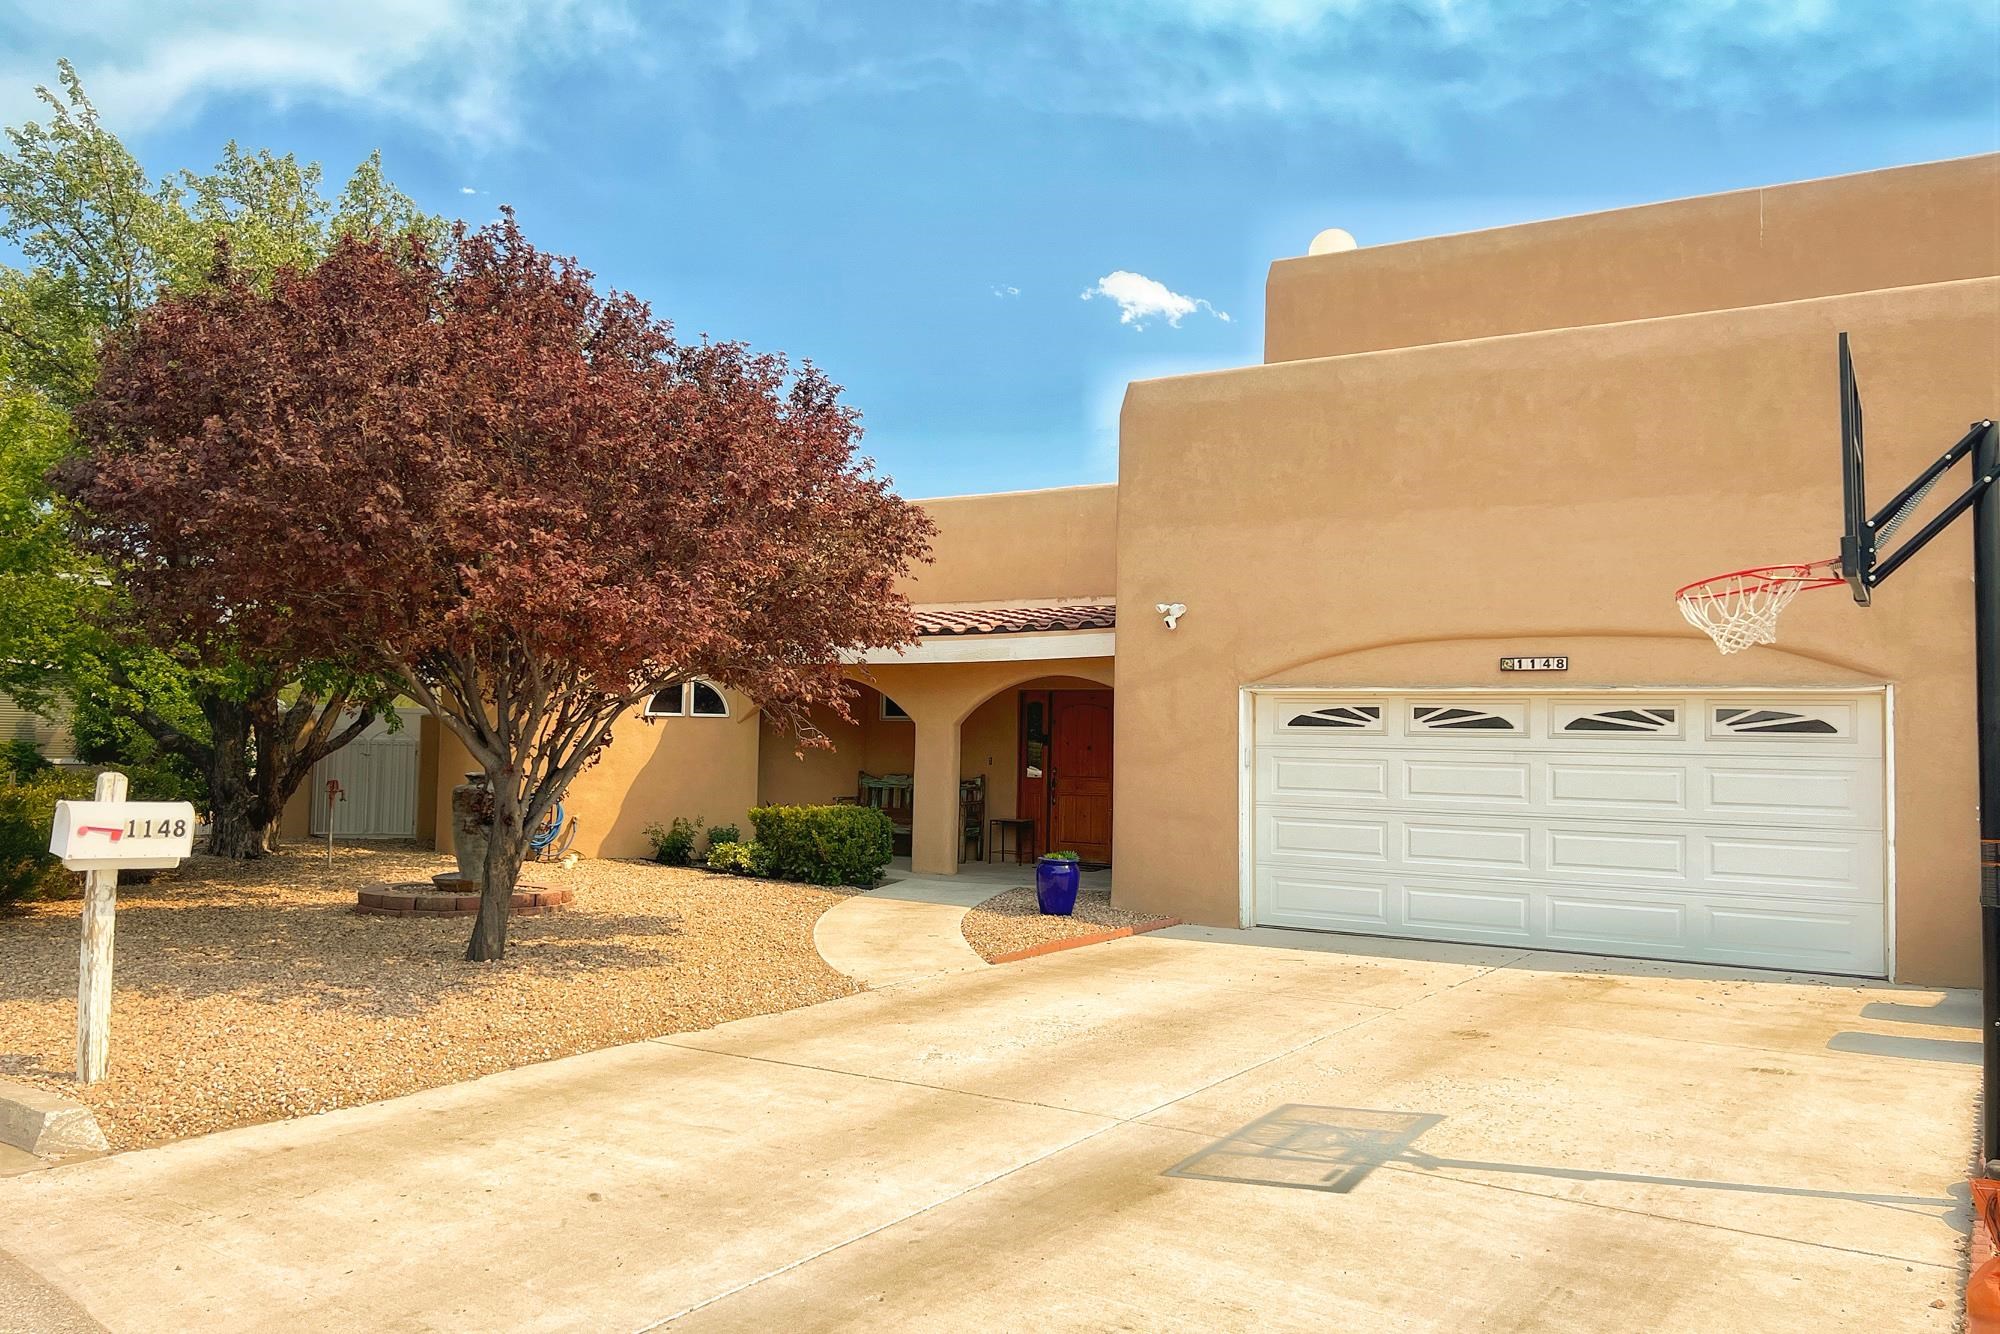 1148 Calle Sombra, Espanola, New Mexico 87532, 4 Bedrooms Bedrooms, ,3 BathroomsBathrooms,Residential,For Sale,1148 Calle Sombra,202201641